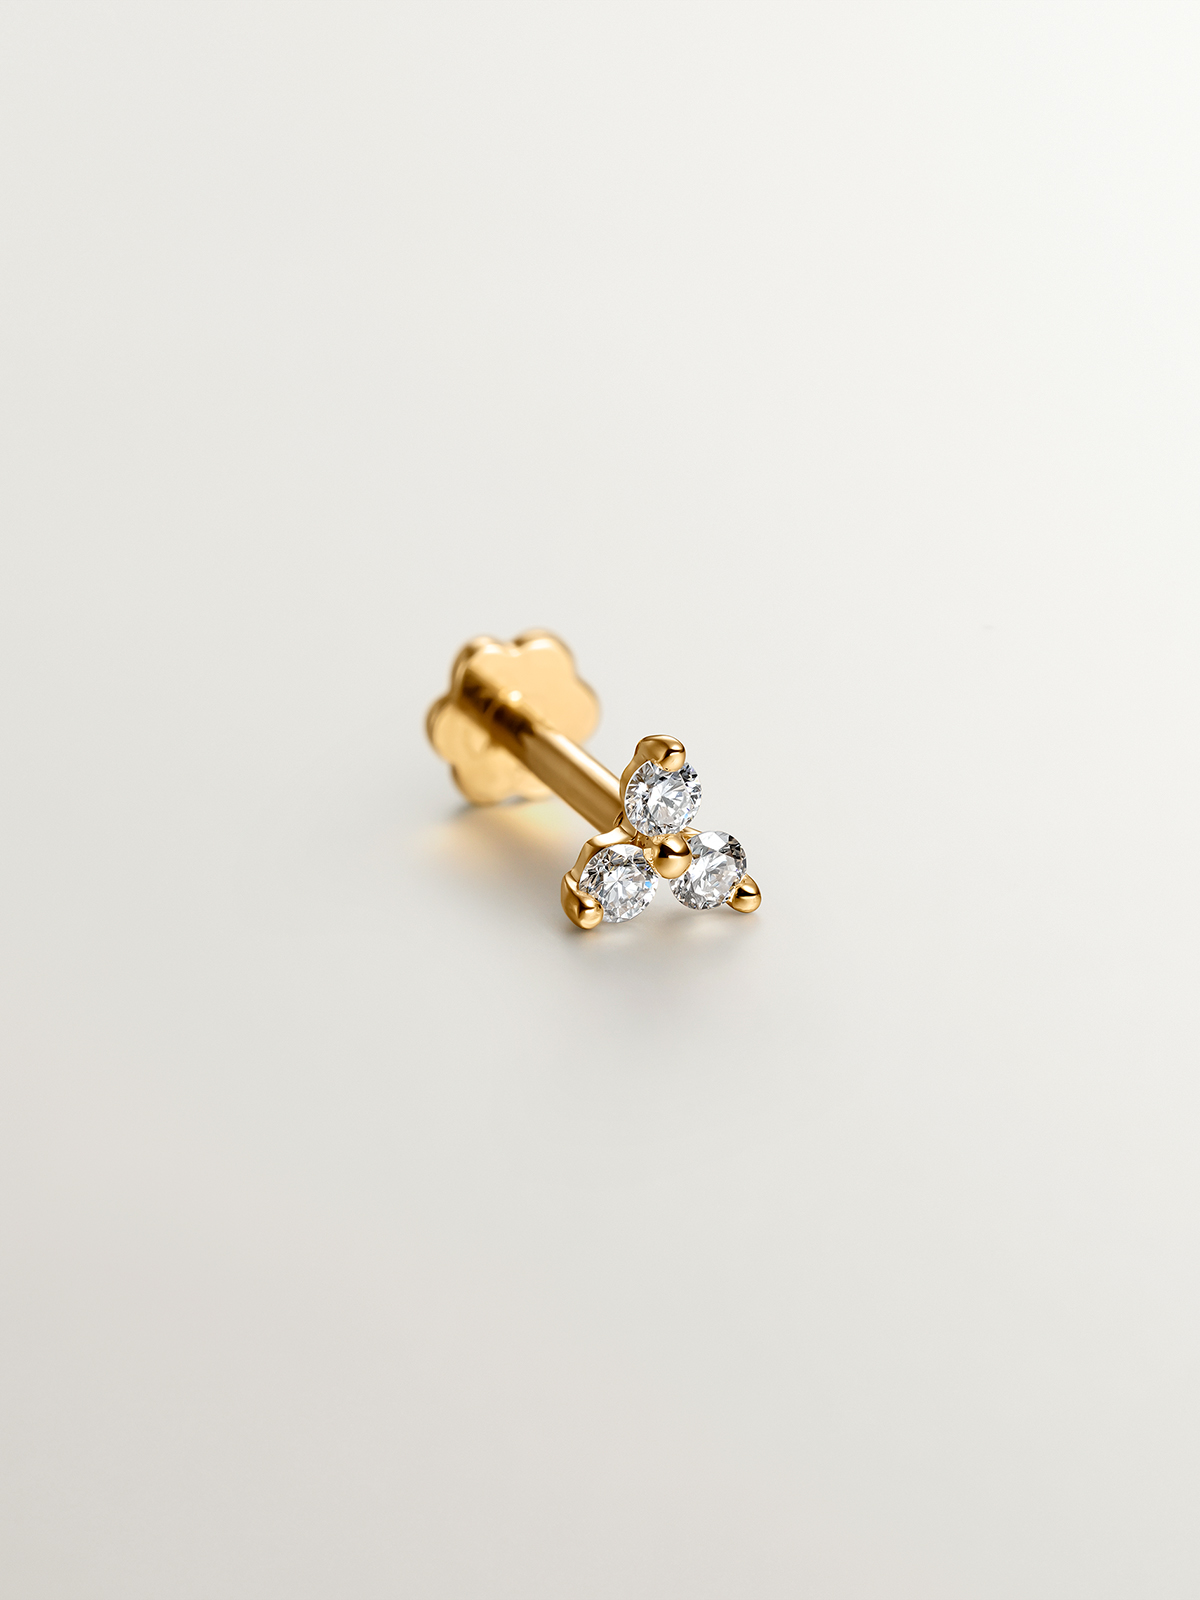 18K yellow gold piercing with 0.06 cts diamond clover